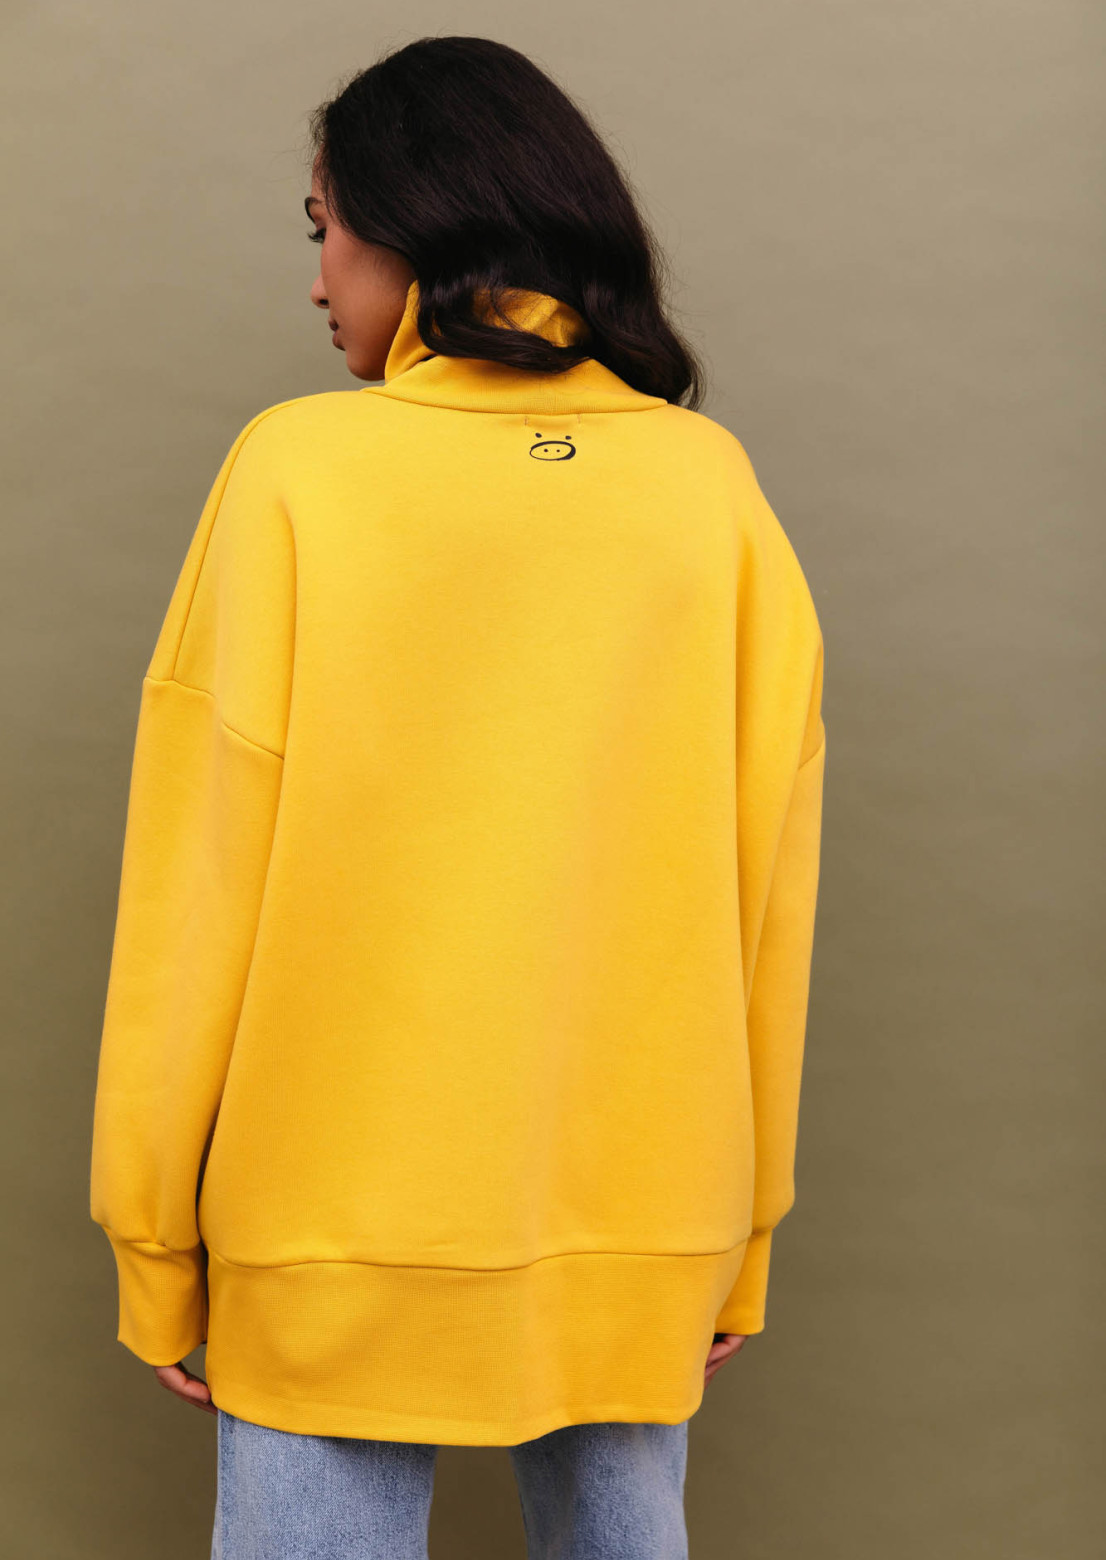 Oil Yellow color three-thread insulated sweatshirt with a pocket